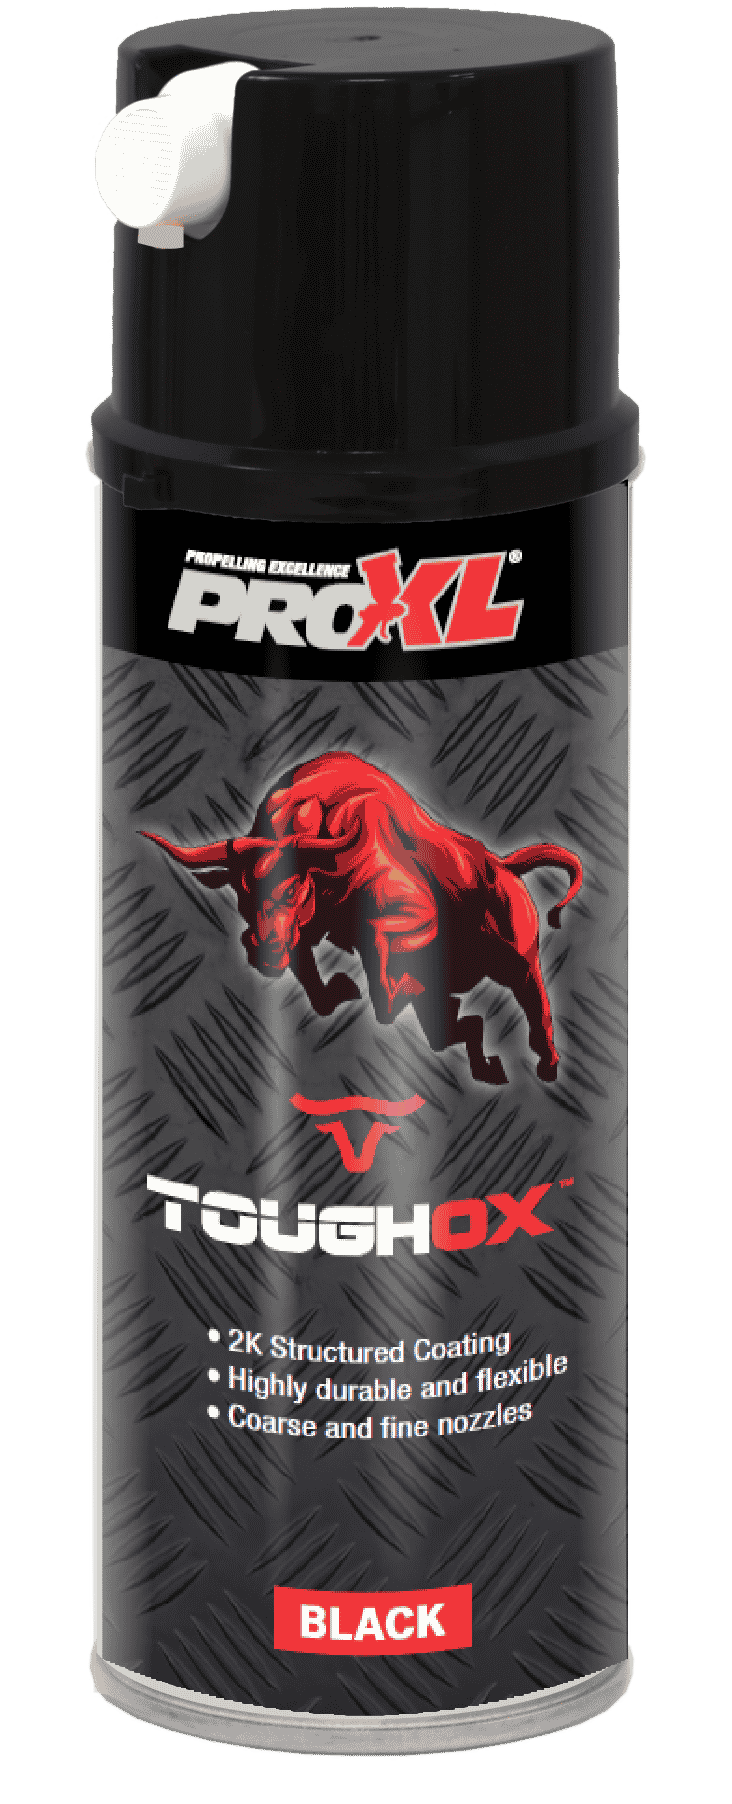 ToughOX Truck Bed Liner Aerosol- Black (400ml) Product Image